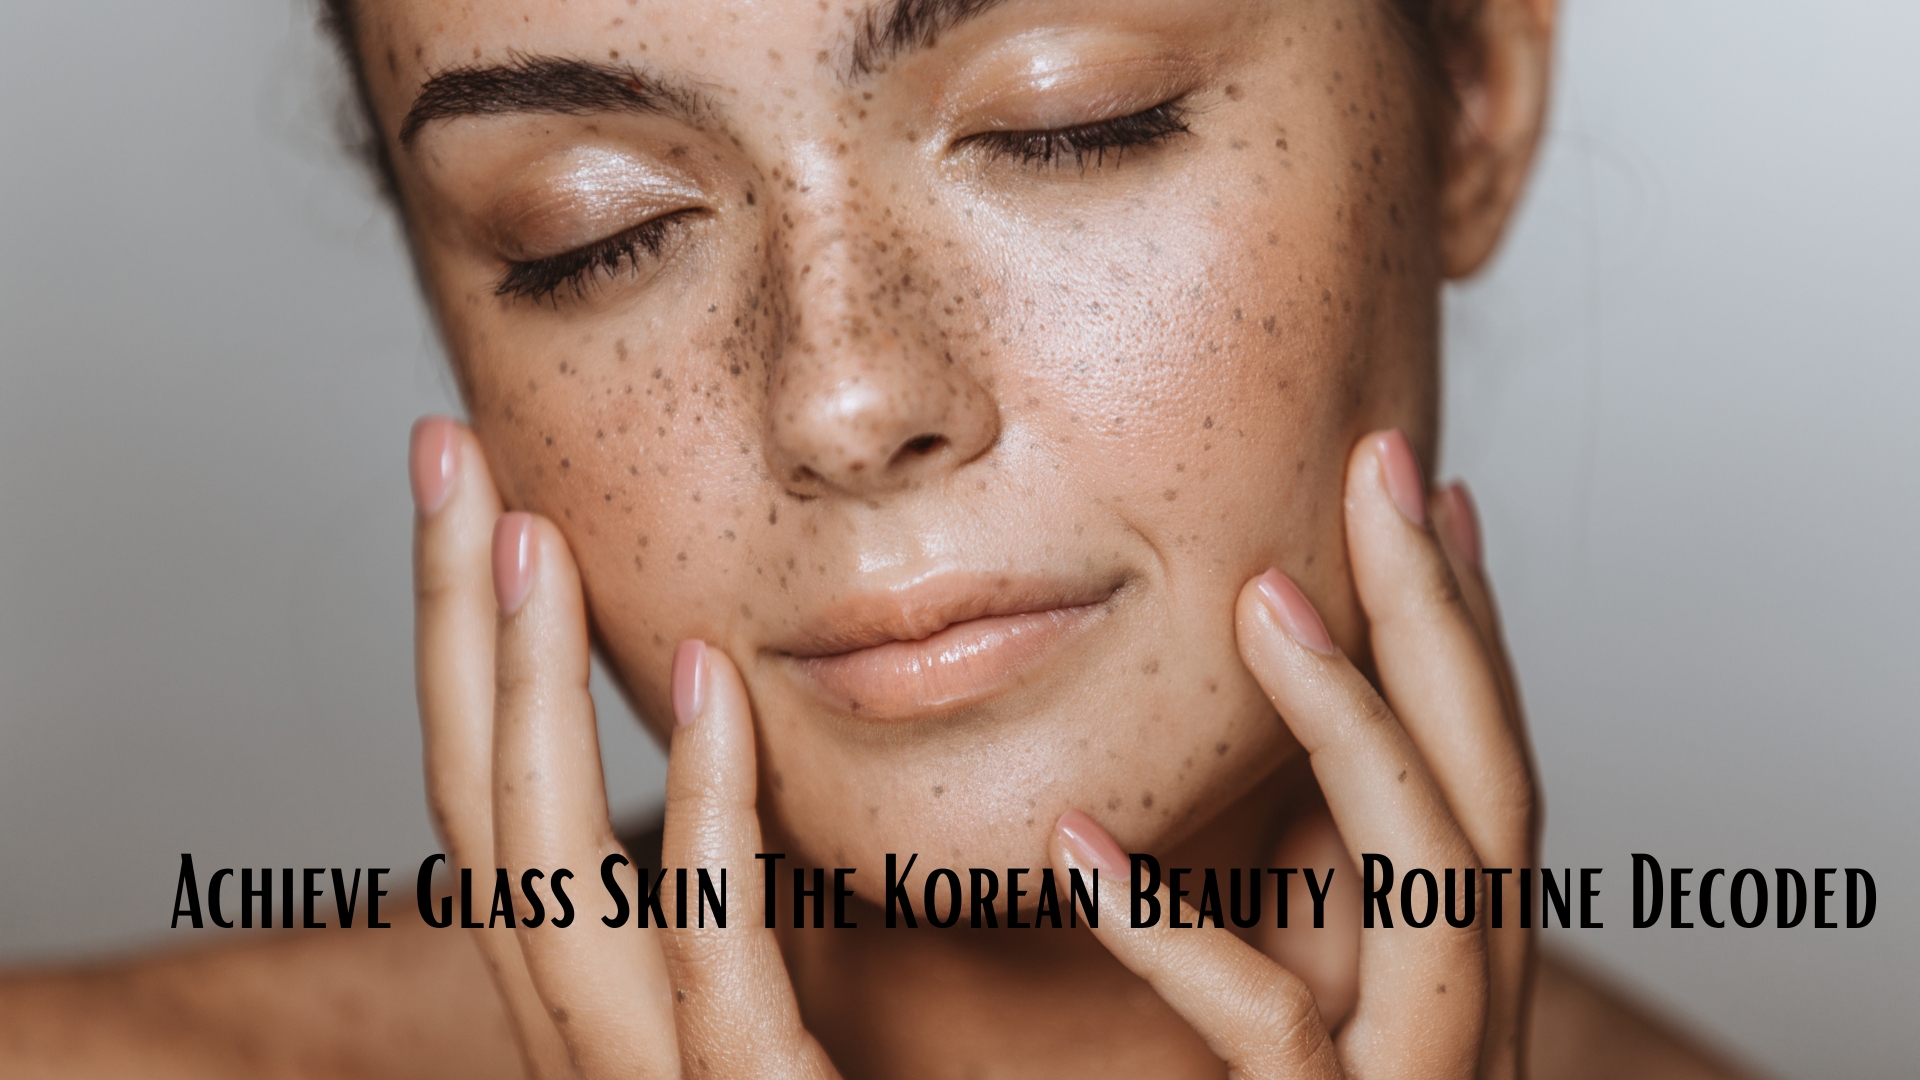 Achieve Glass Skin The Korean Beauty Routine Decoded